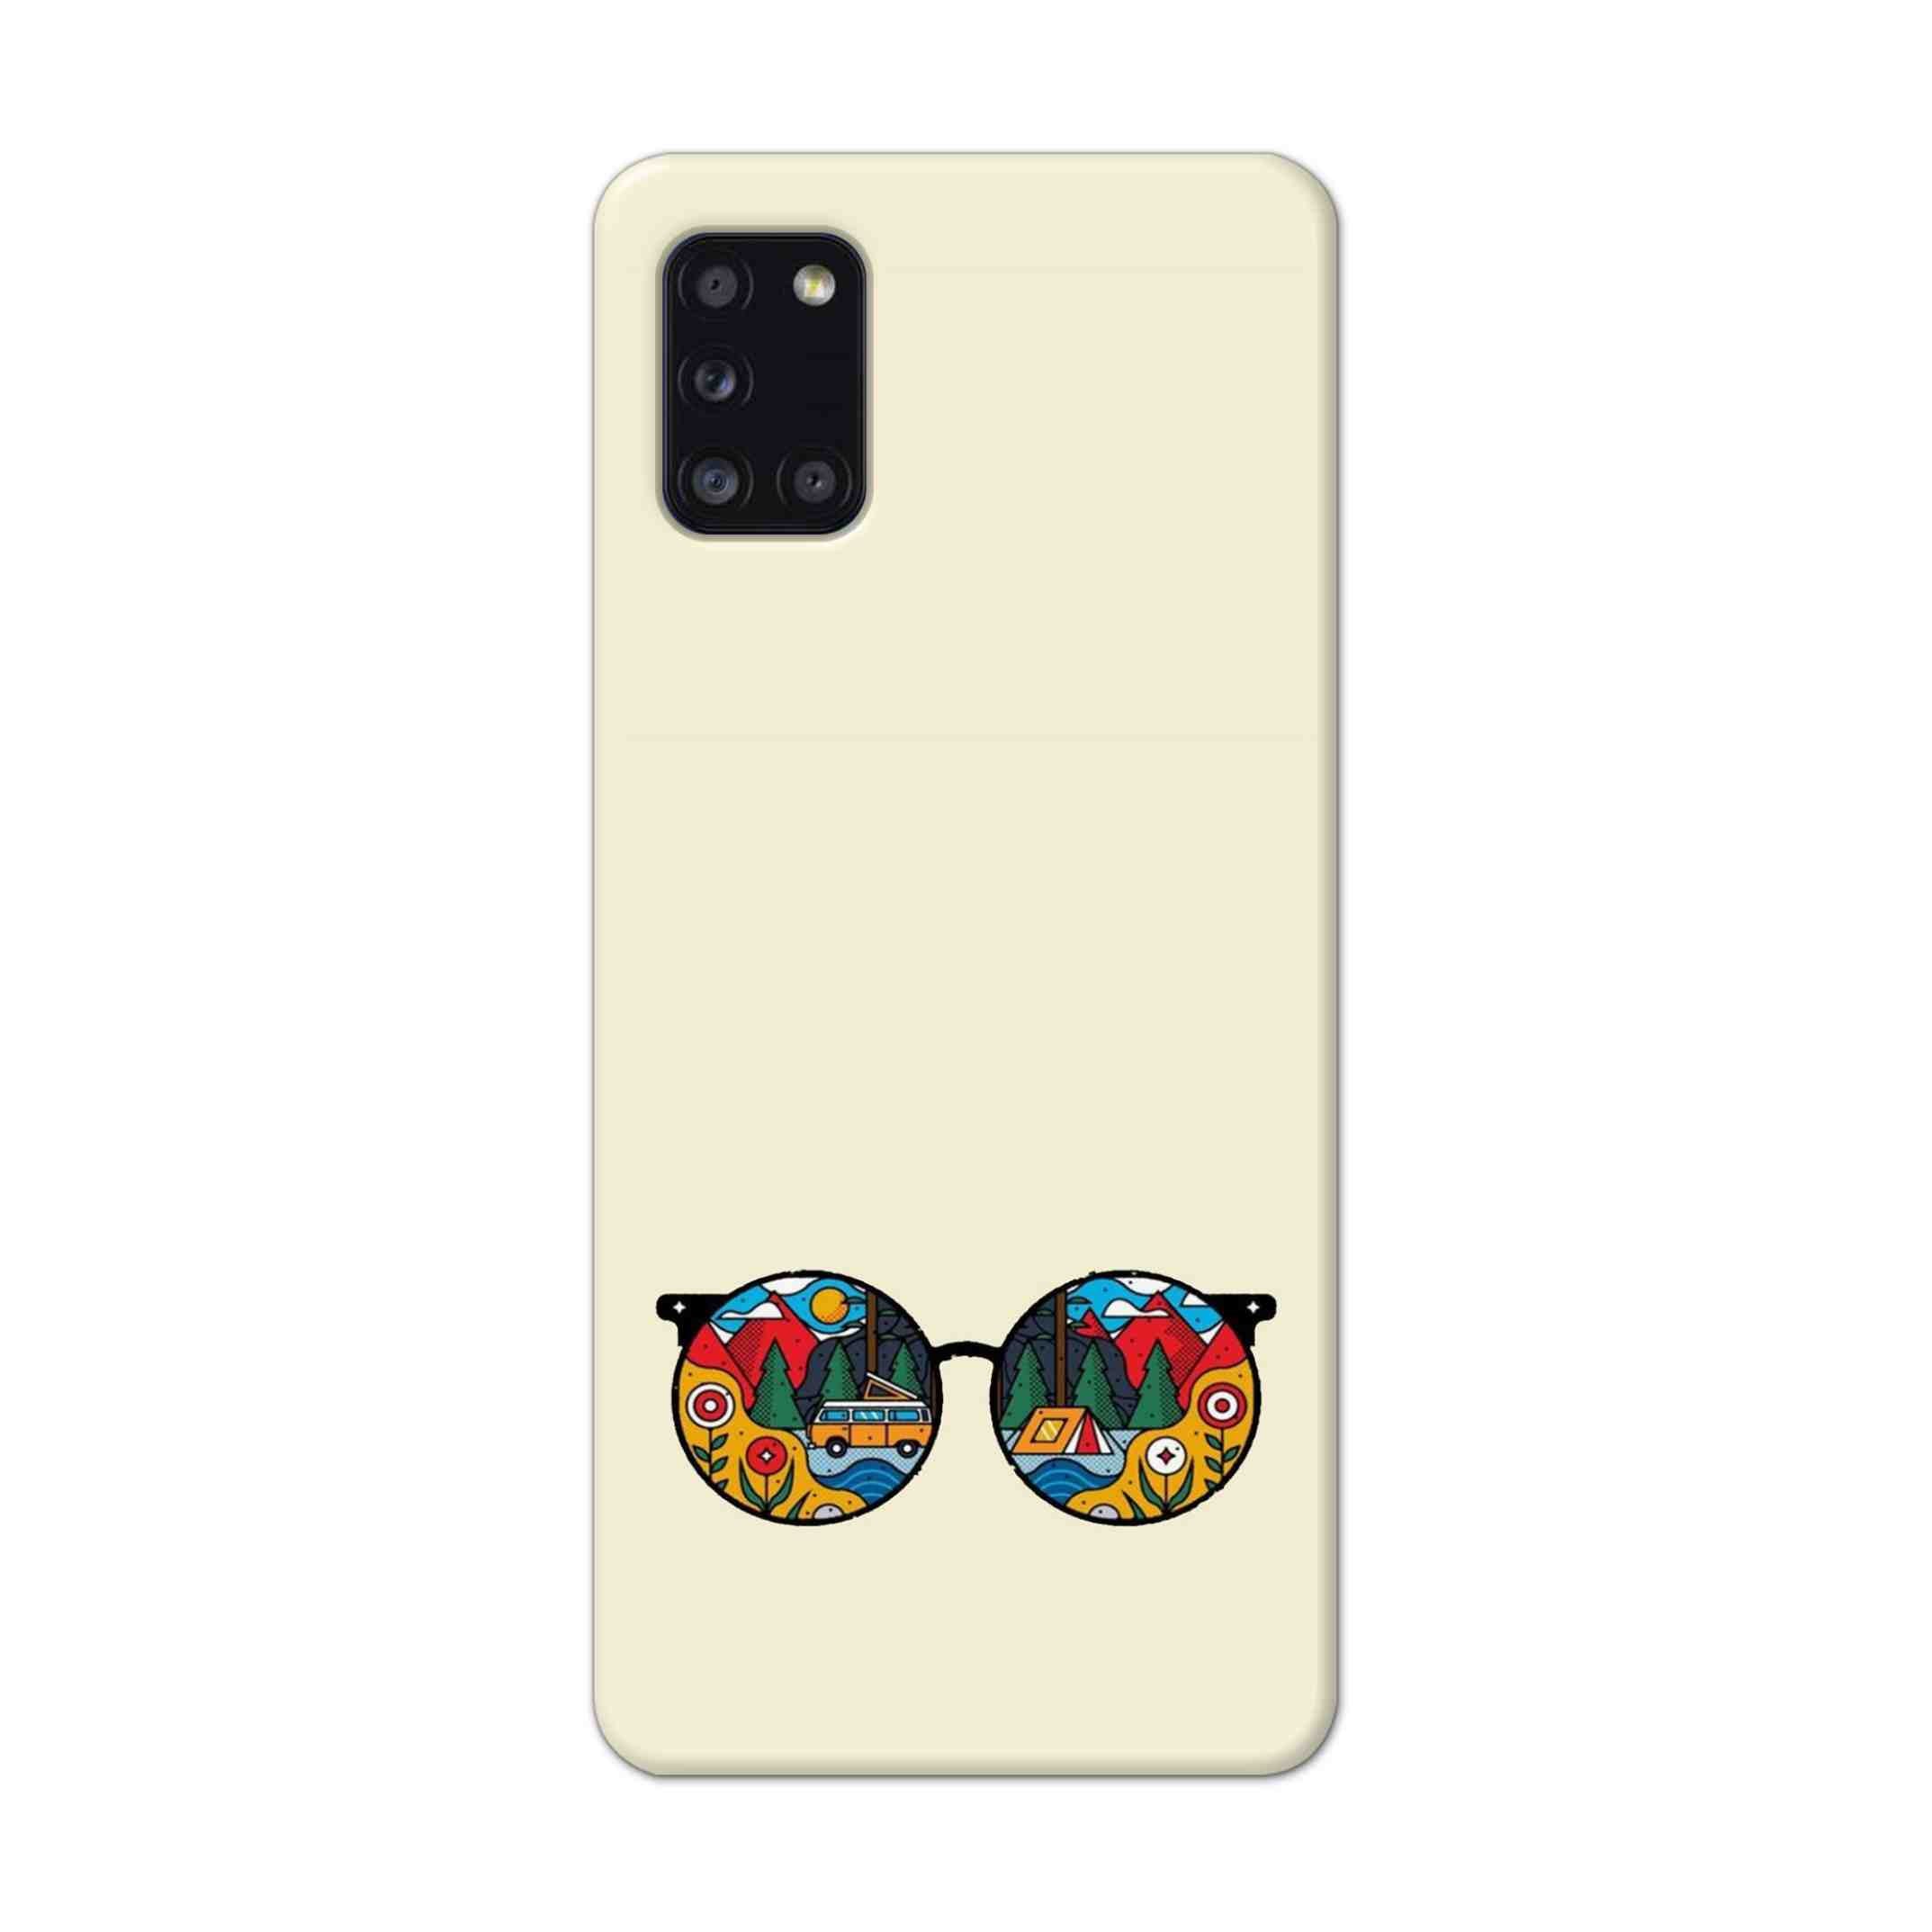 Buy Rainbow Sunglasses Hard Back Mobile Phone Case Cover For Samsung Galaxy A31 Online